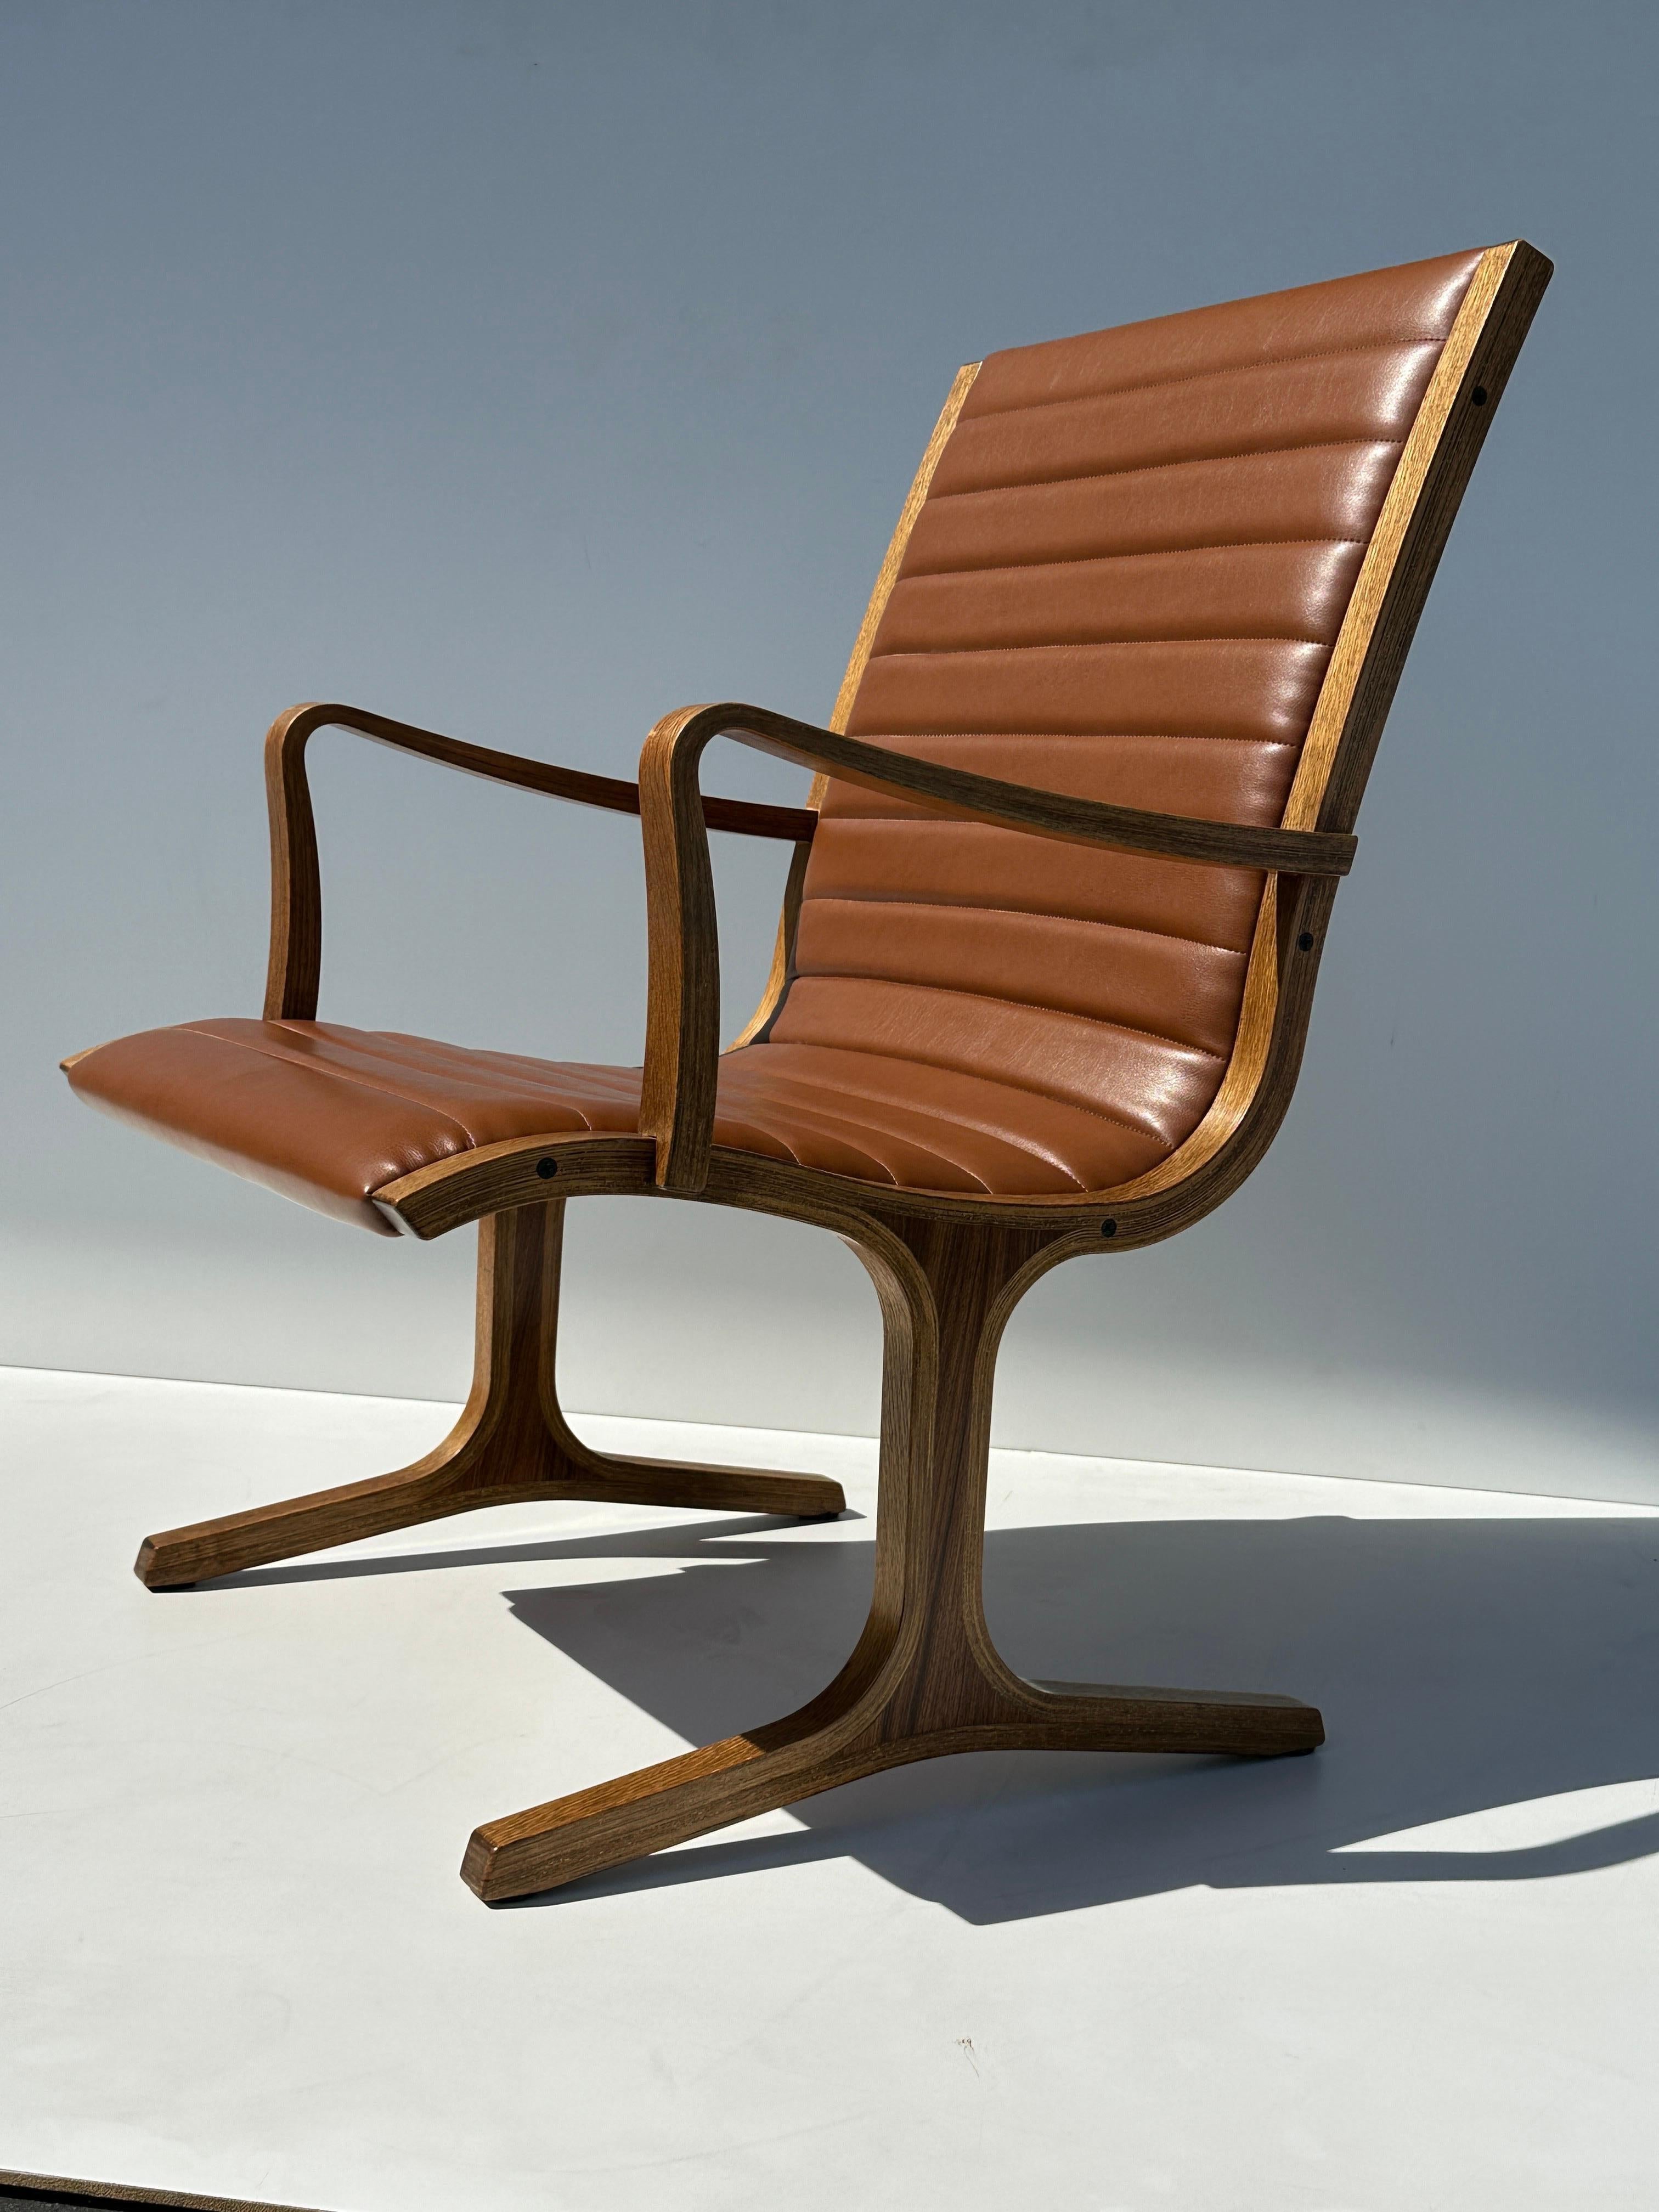 “Heron” chair designed by Mitsumasa Sugasawa for Tendo Mokko Japan. Made of bent laminated oak with rosewood inserts on legs and newly reupholstered in soft vinyl. Arm height is 22” Beautiful example of mid century modern Japanese furniture.